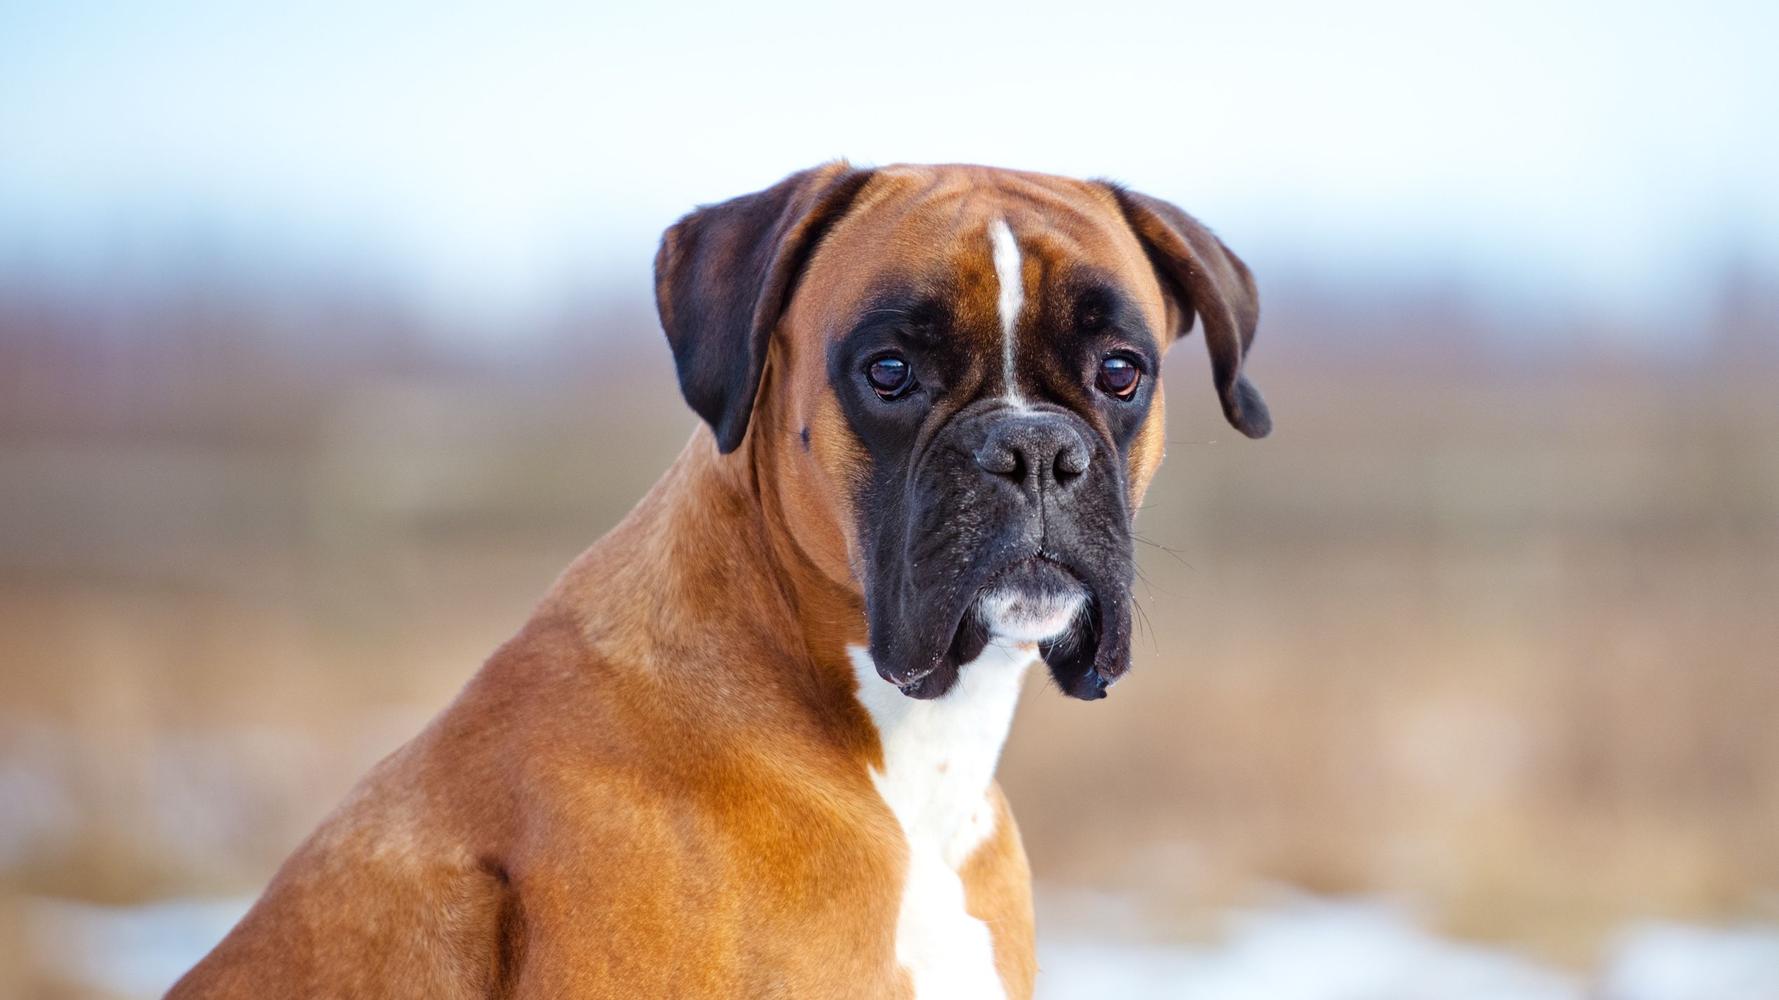 York Dog cute 25 Buffalo, | New for in puppies Good Boxer sale